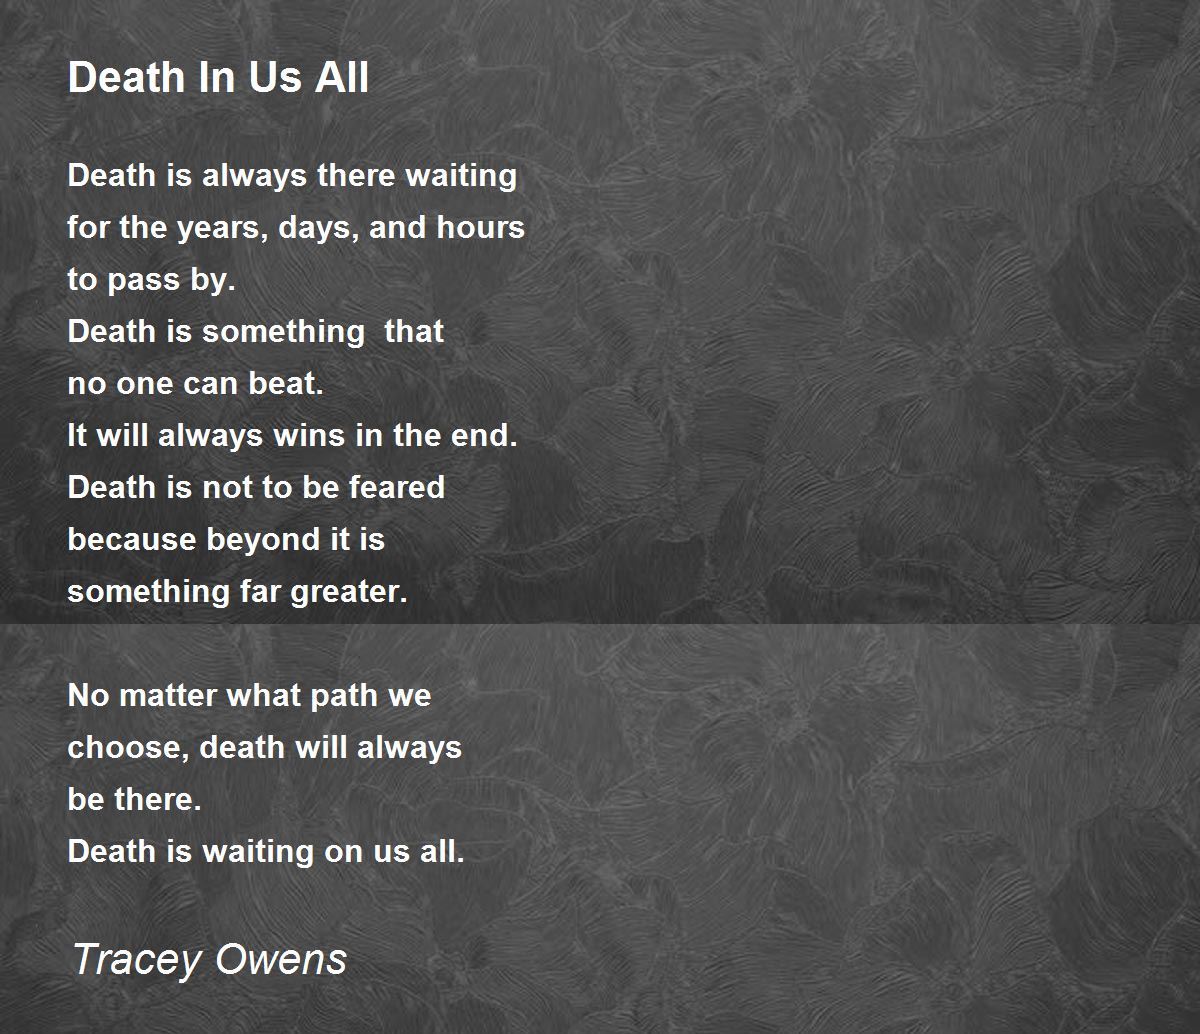 Death In Us All - Death In Us All Poem by Tracey Owens